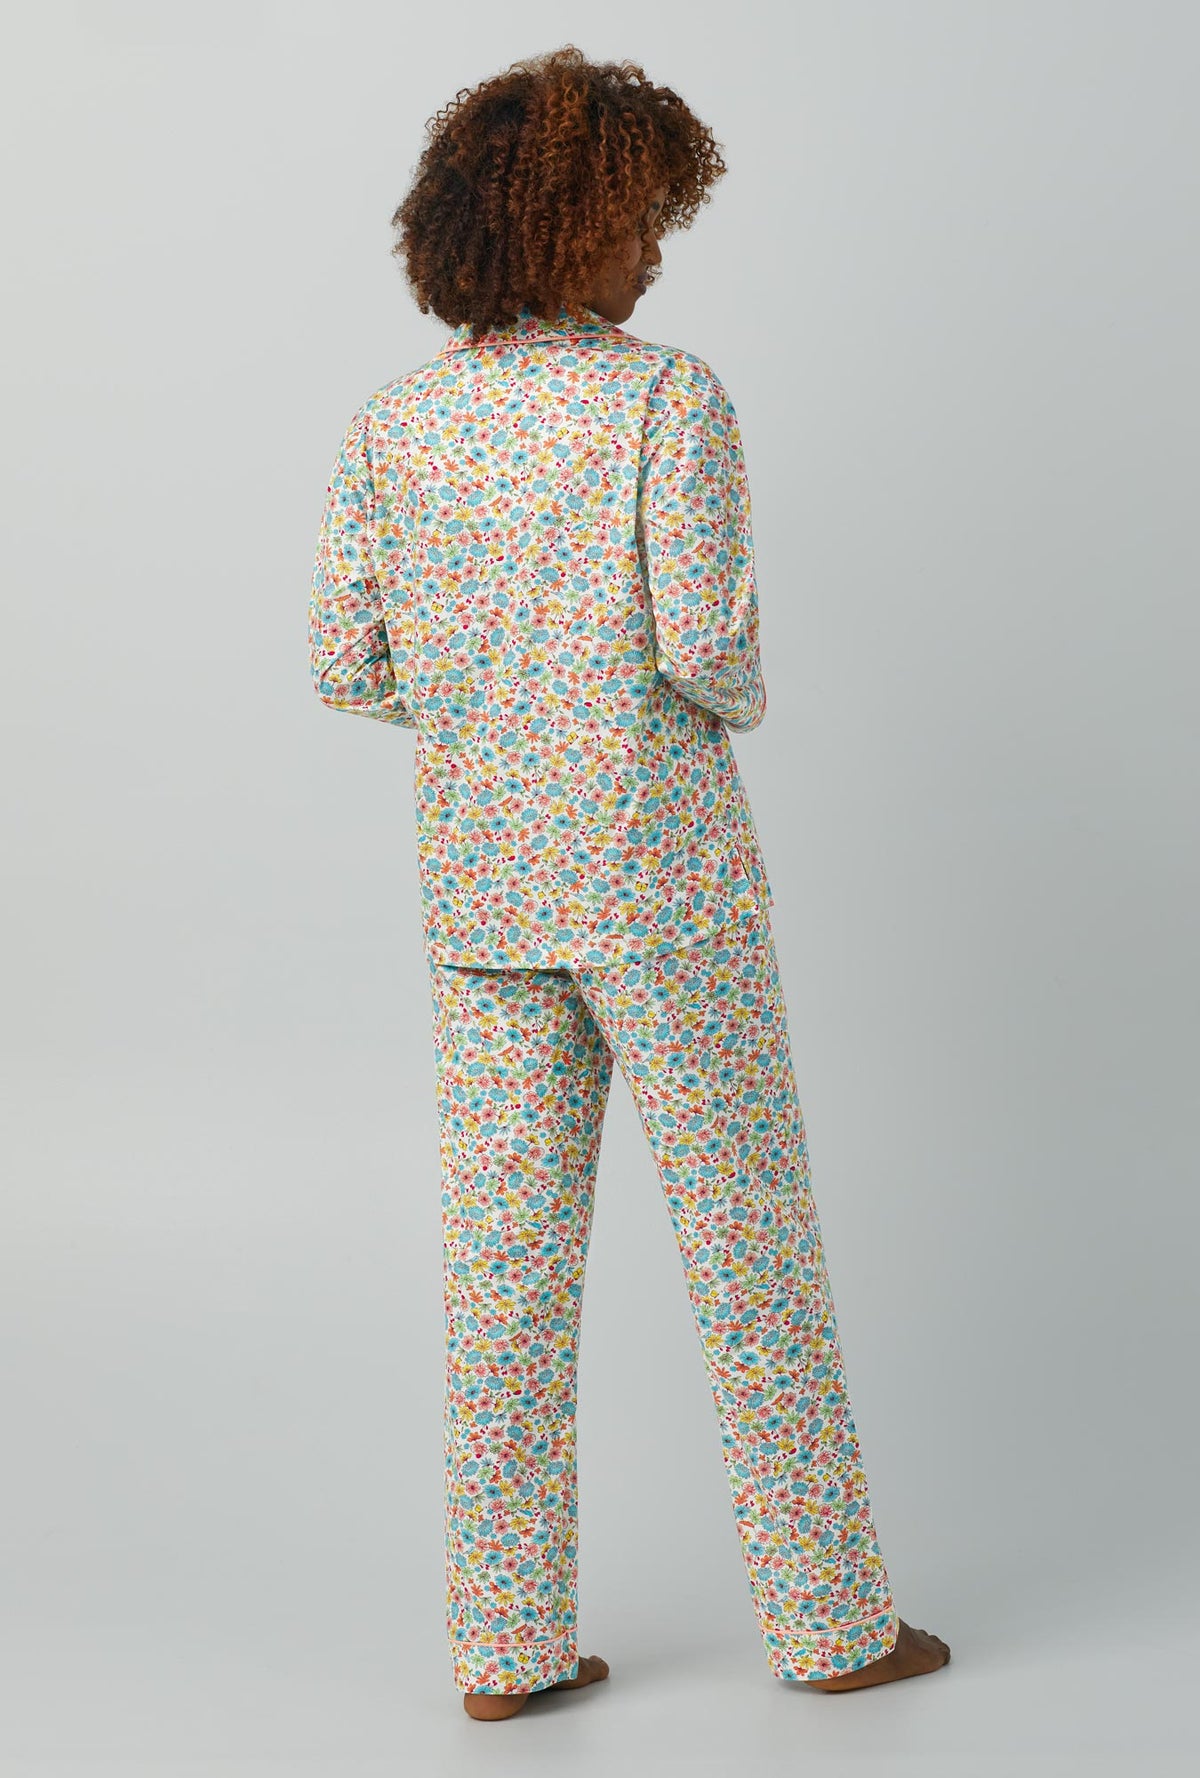 A lady wearing Long Sleeve Classic Woven Cotton Poplin PJ Set with spring time floral print